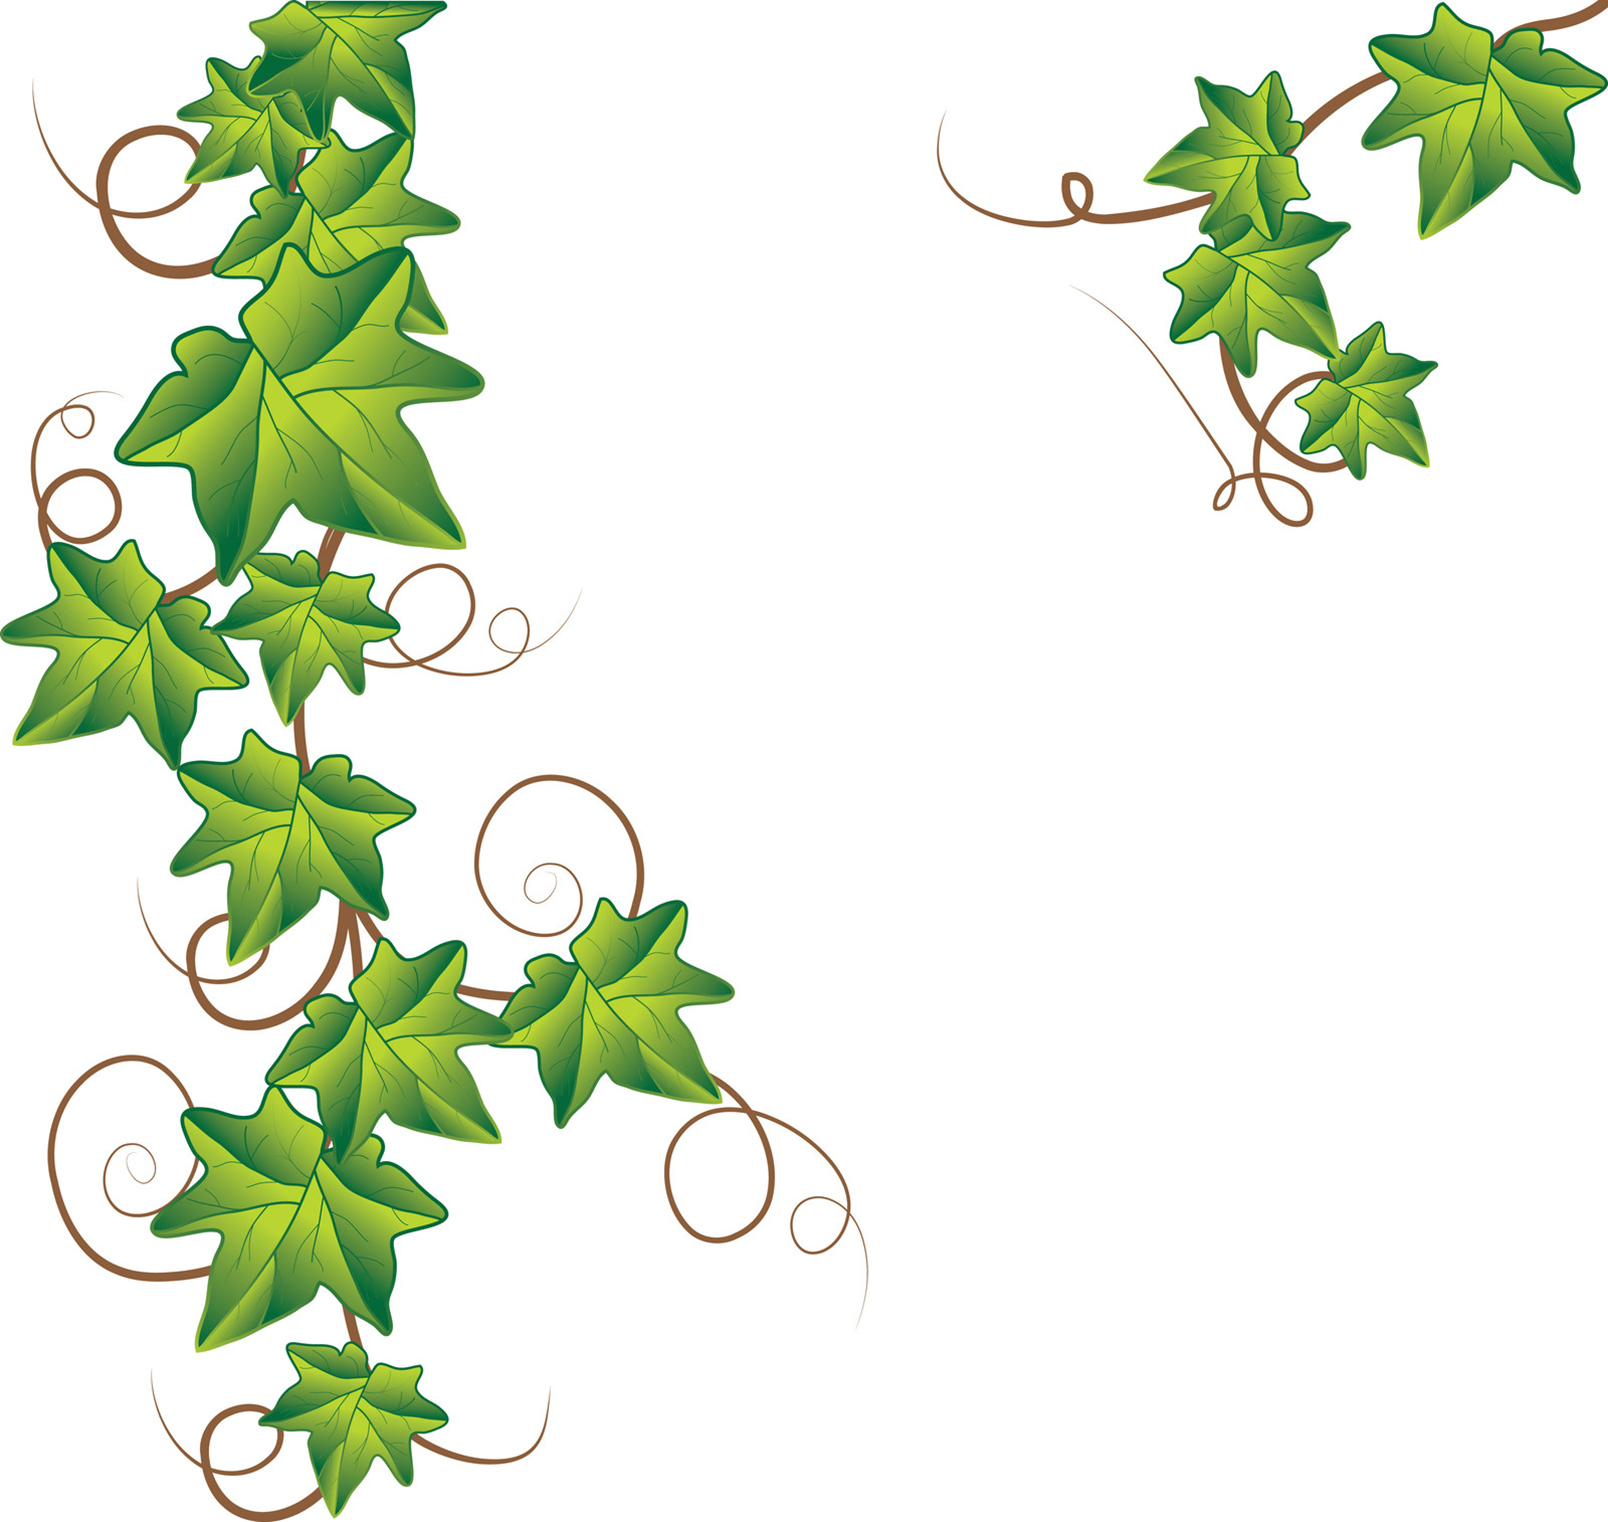 Ivy Free Images At Clker Com Vector Clip Art Online Royalty Free